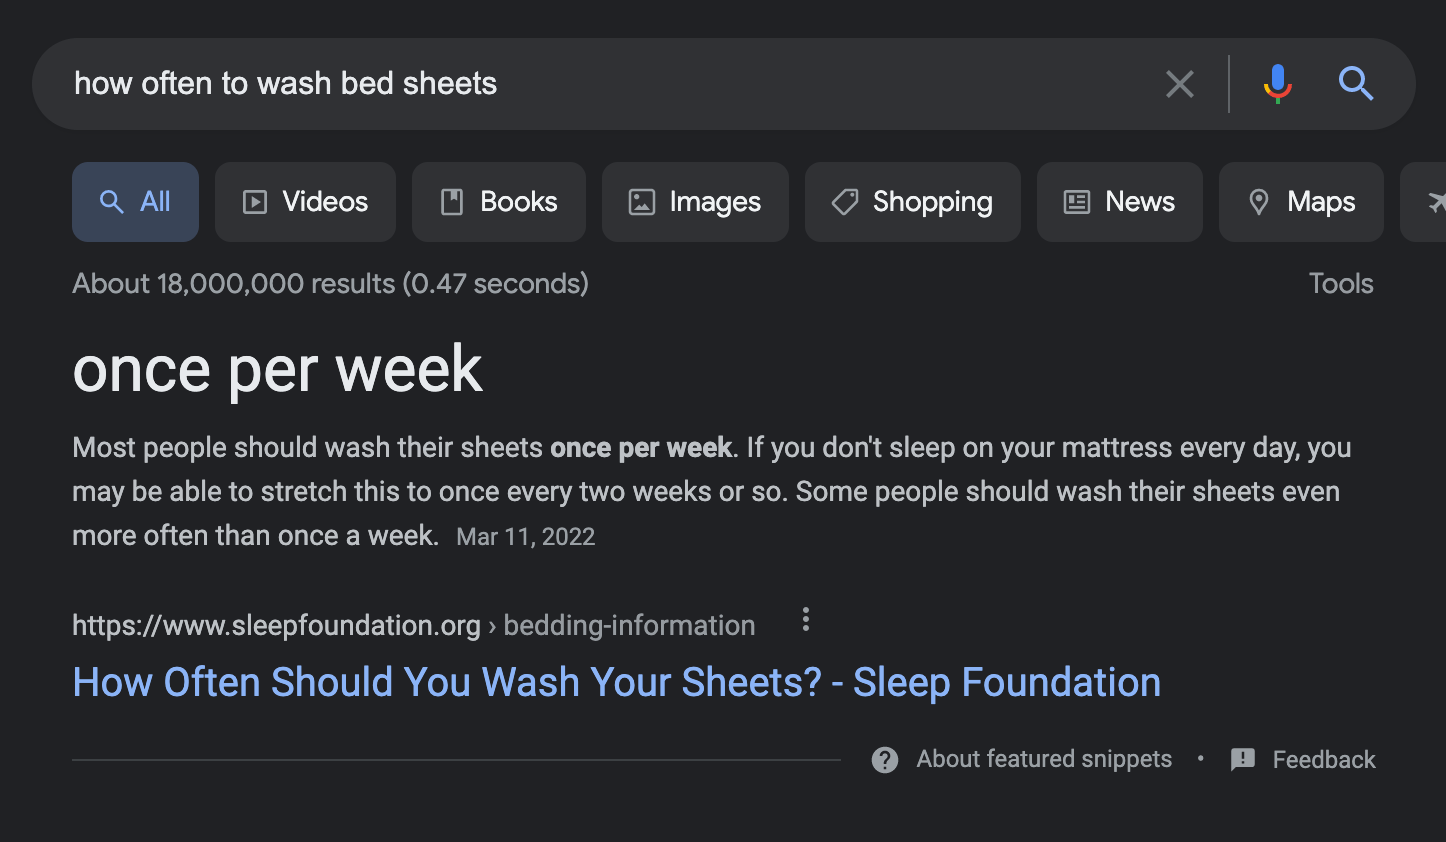 how often to wash bed sheets の強調スニペット